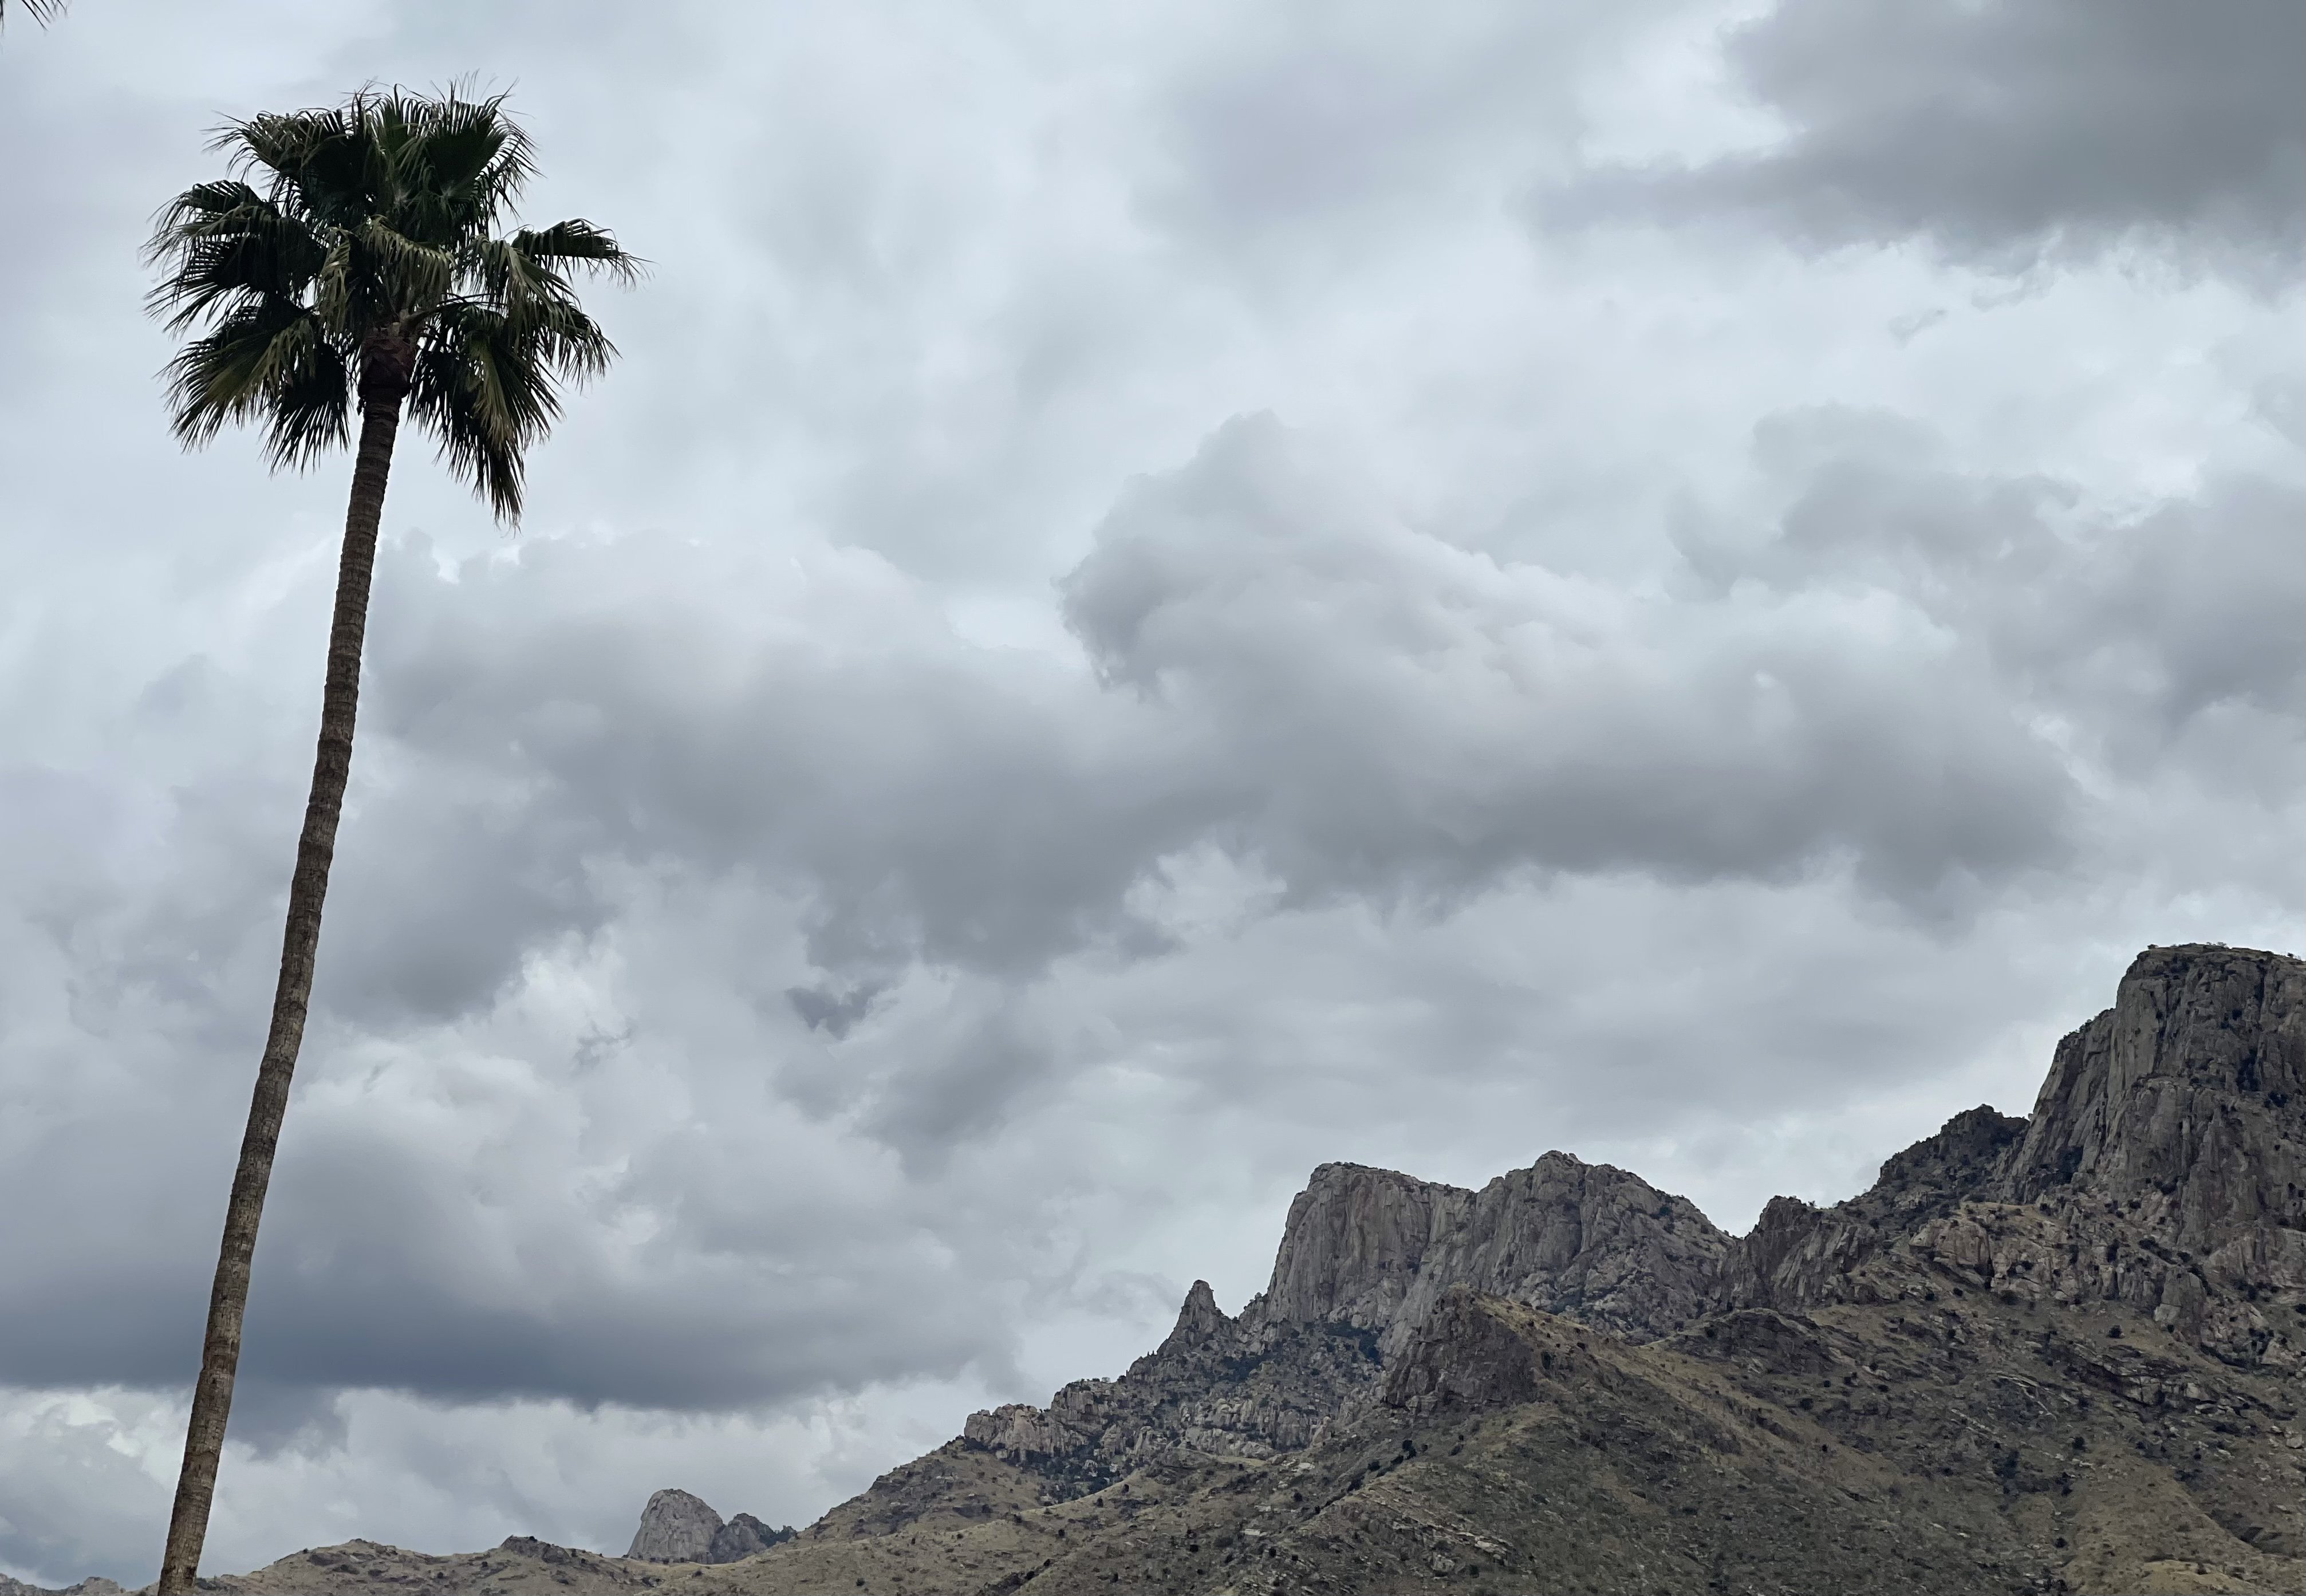 A sharp, craggy hilltop with a lone palm tree in the foreground and dark billowy clouds in the background. 